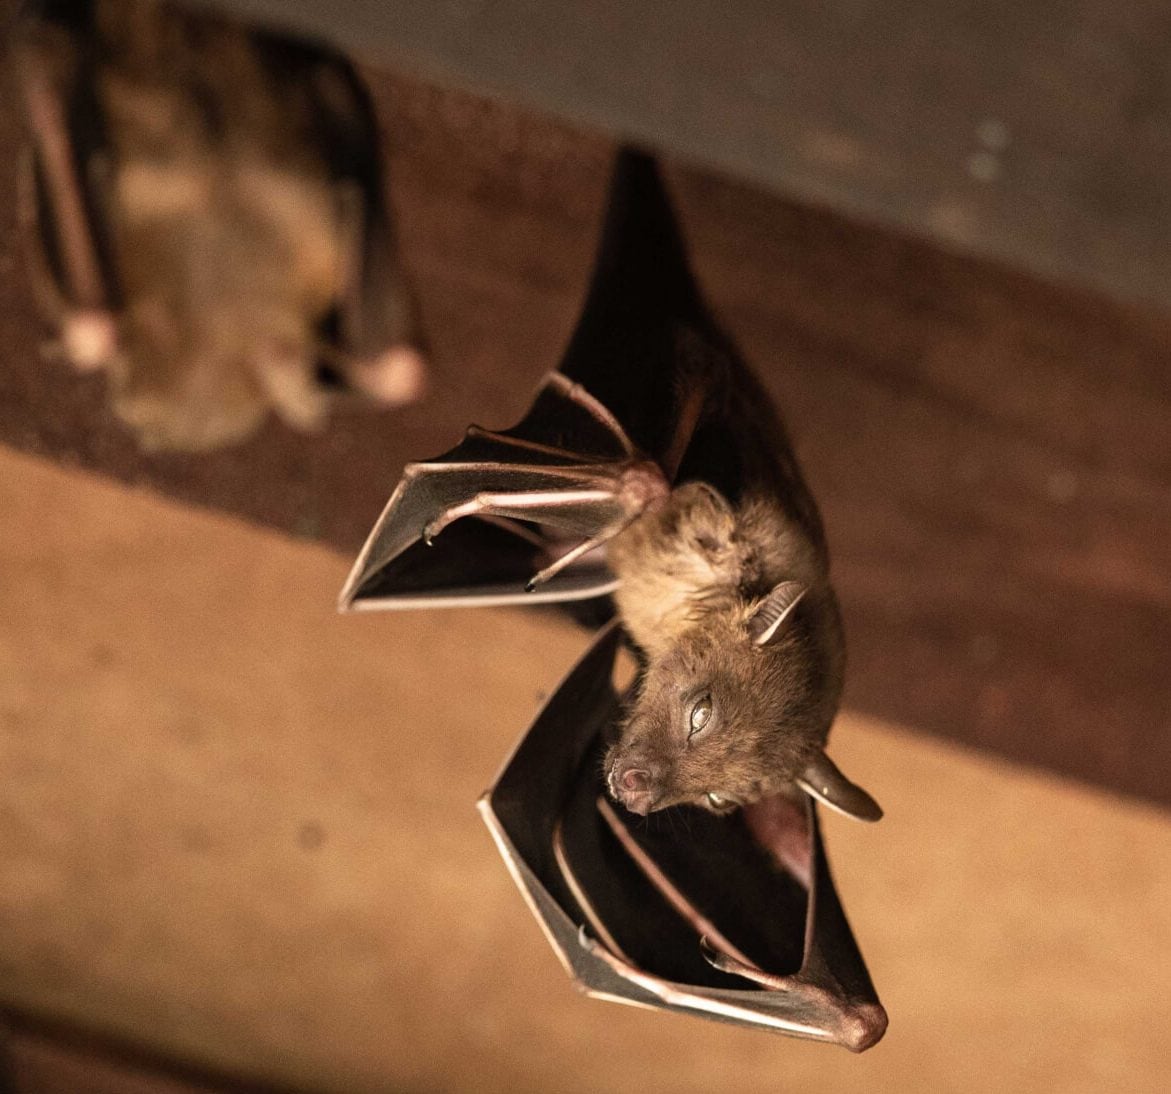 Expert bat removal services for a safe and humane solution in West Palm Beach